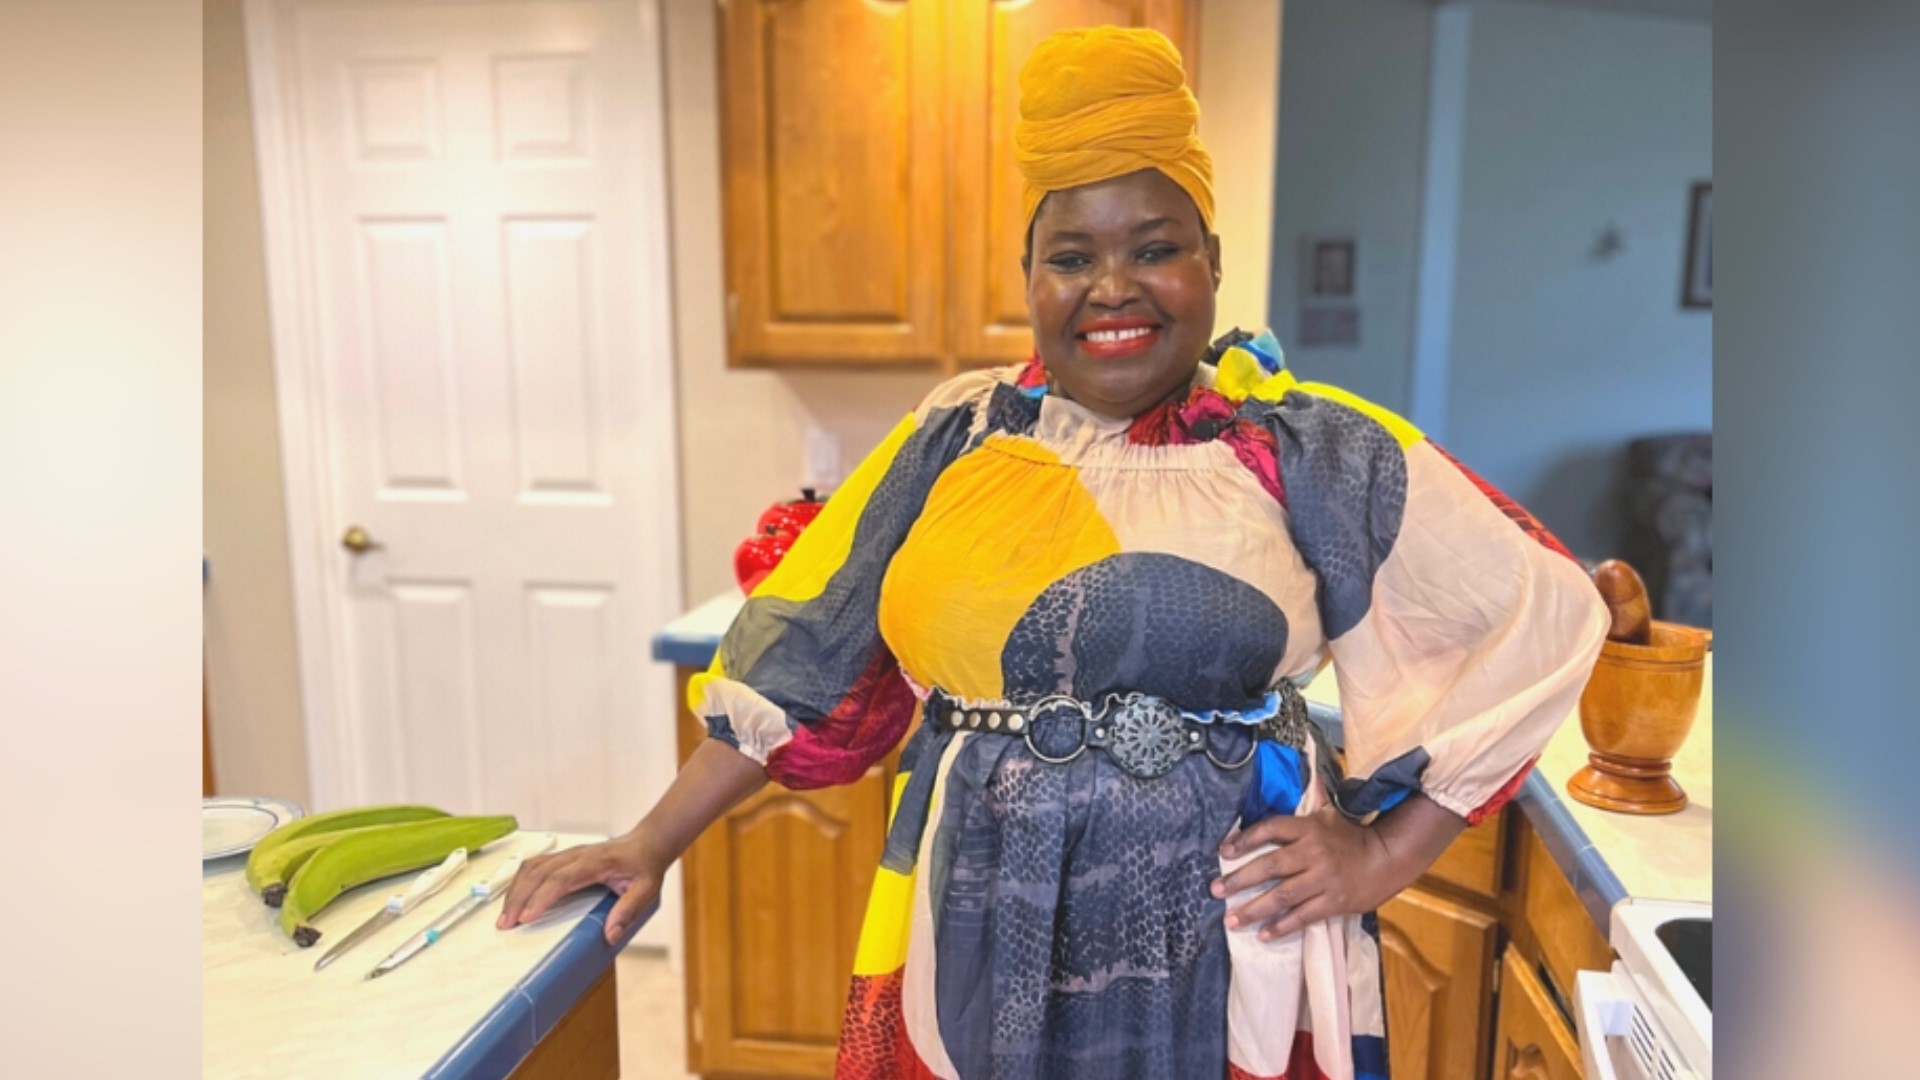 The Haitian business owner overcame hardships of homelessness, health, finances and more to now having her products sold in over 10 different stores across Oregon.